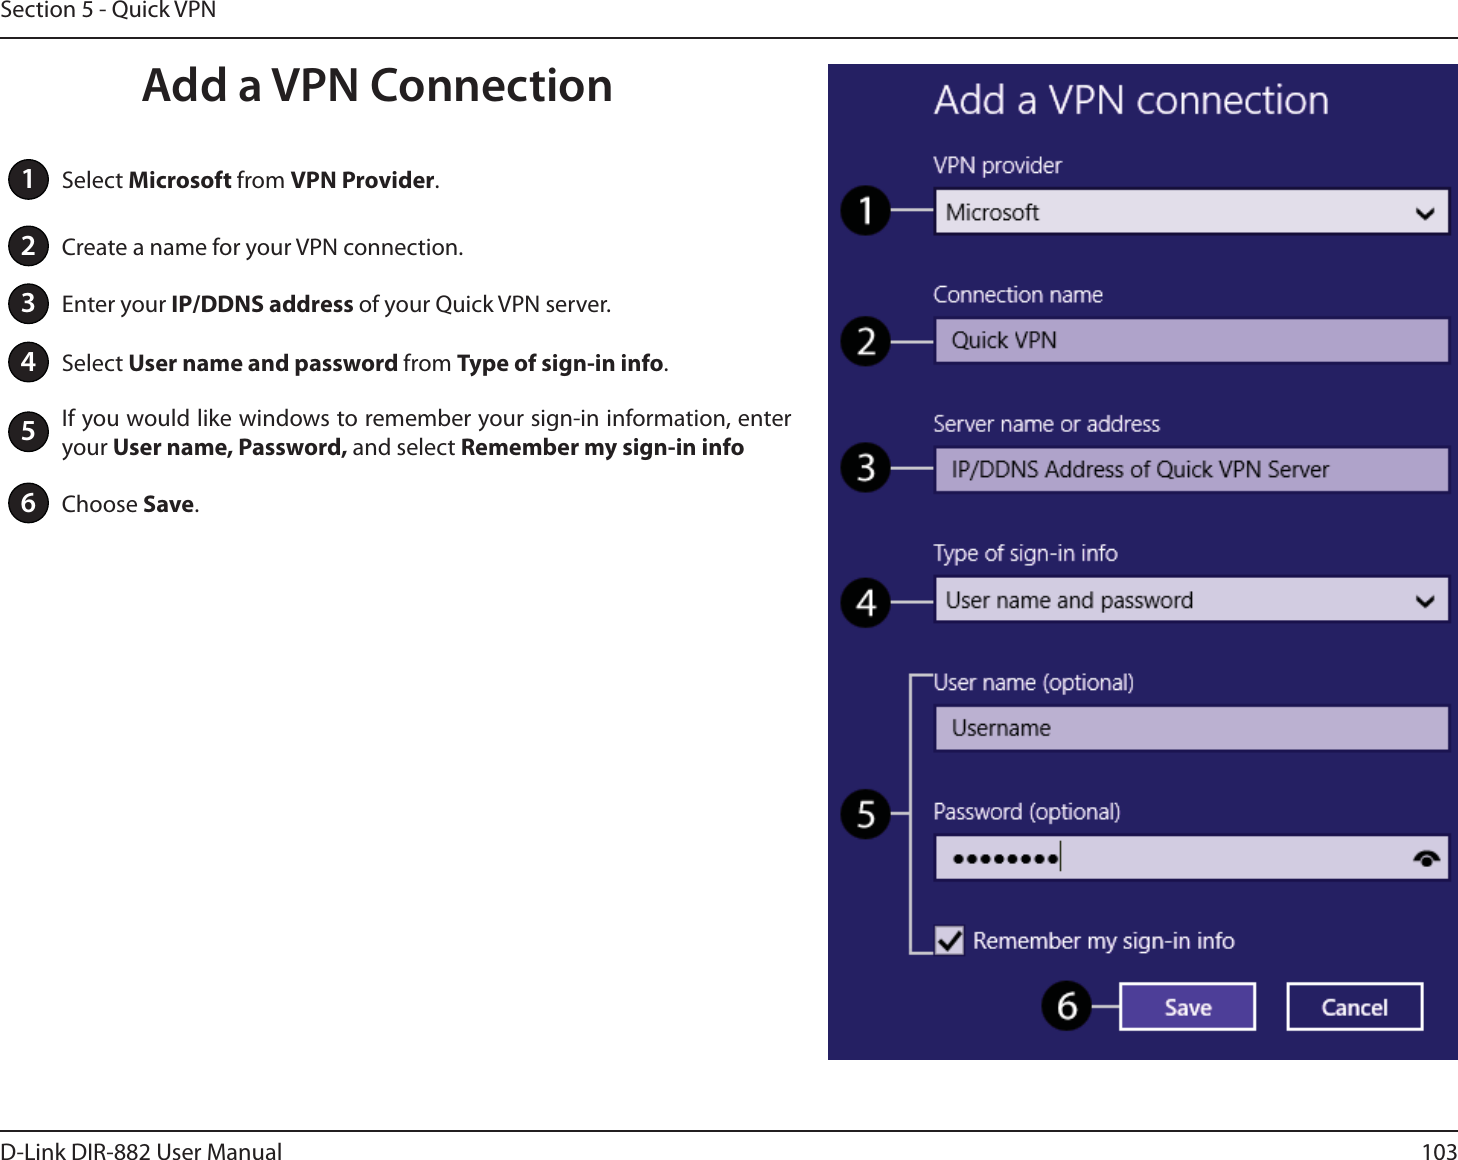 103D-Link DIR-882 User ManualSection 5 - Quick VPN1Select Microsoft from VPN Provider.2Create a name for your VPN connection.3Enter your *1%%/4BEESFTTof your Quick VPN server.4Select User name and password from Type of sign-in info.5If you would like windows to remember your sign-in information, enter your 6TFSOBNF1BTTXPSEand select Remember my sign-in info6Choose Save.Add a VPN Connection